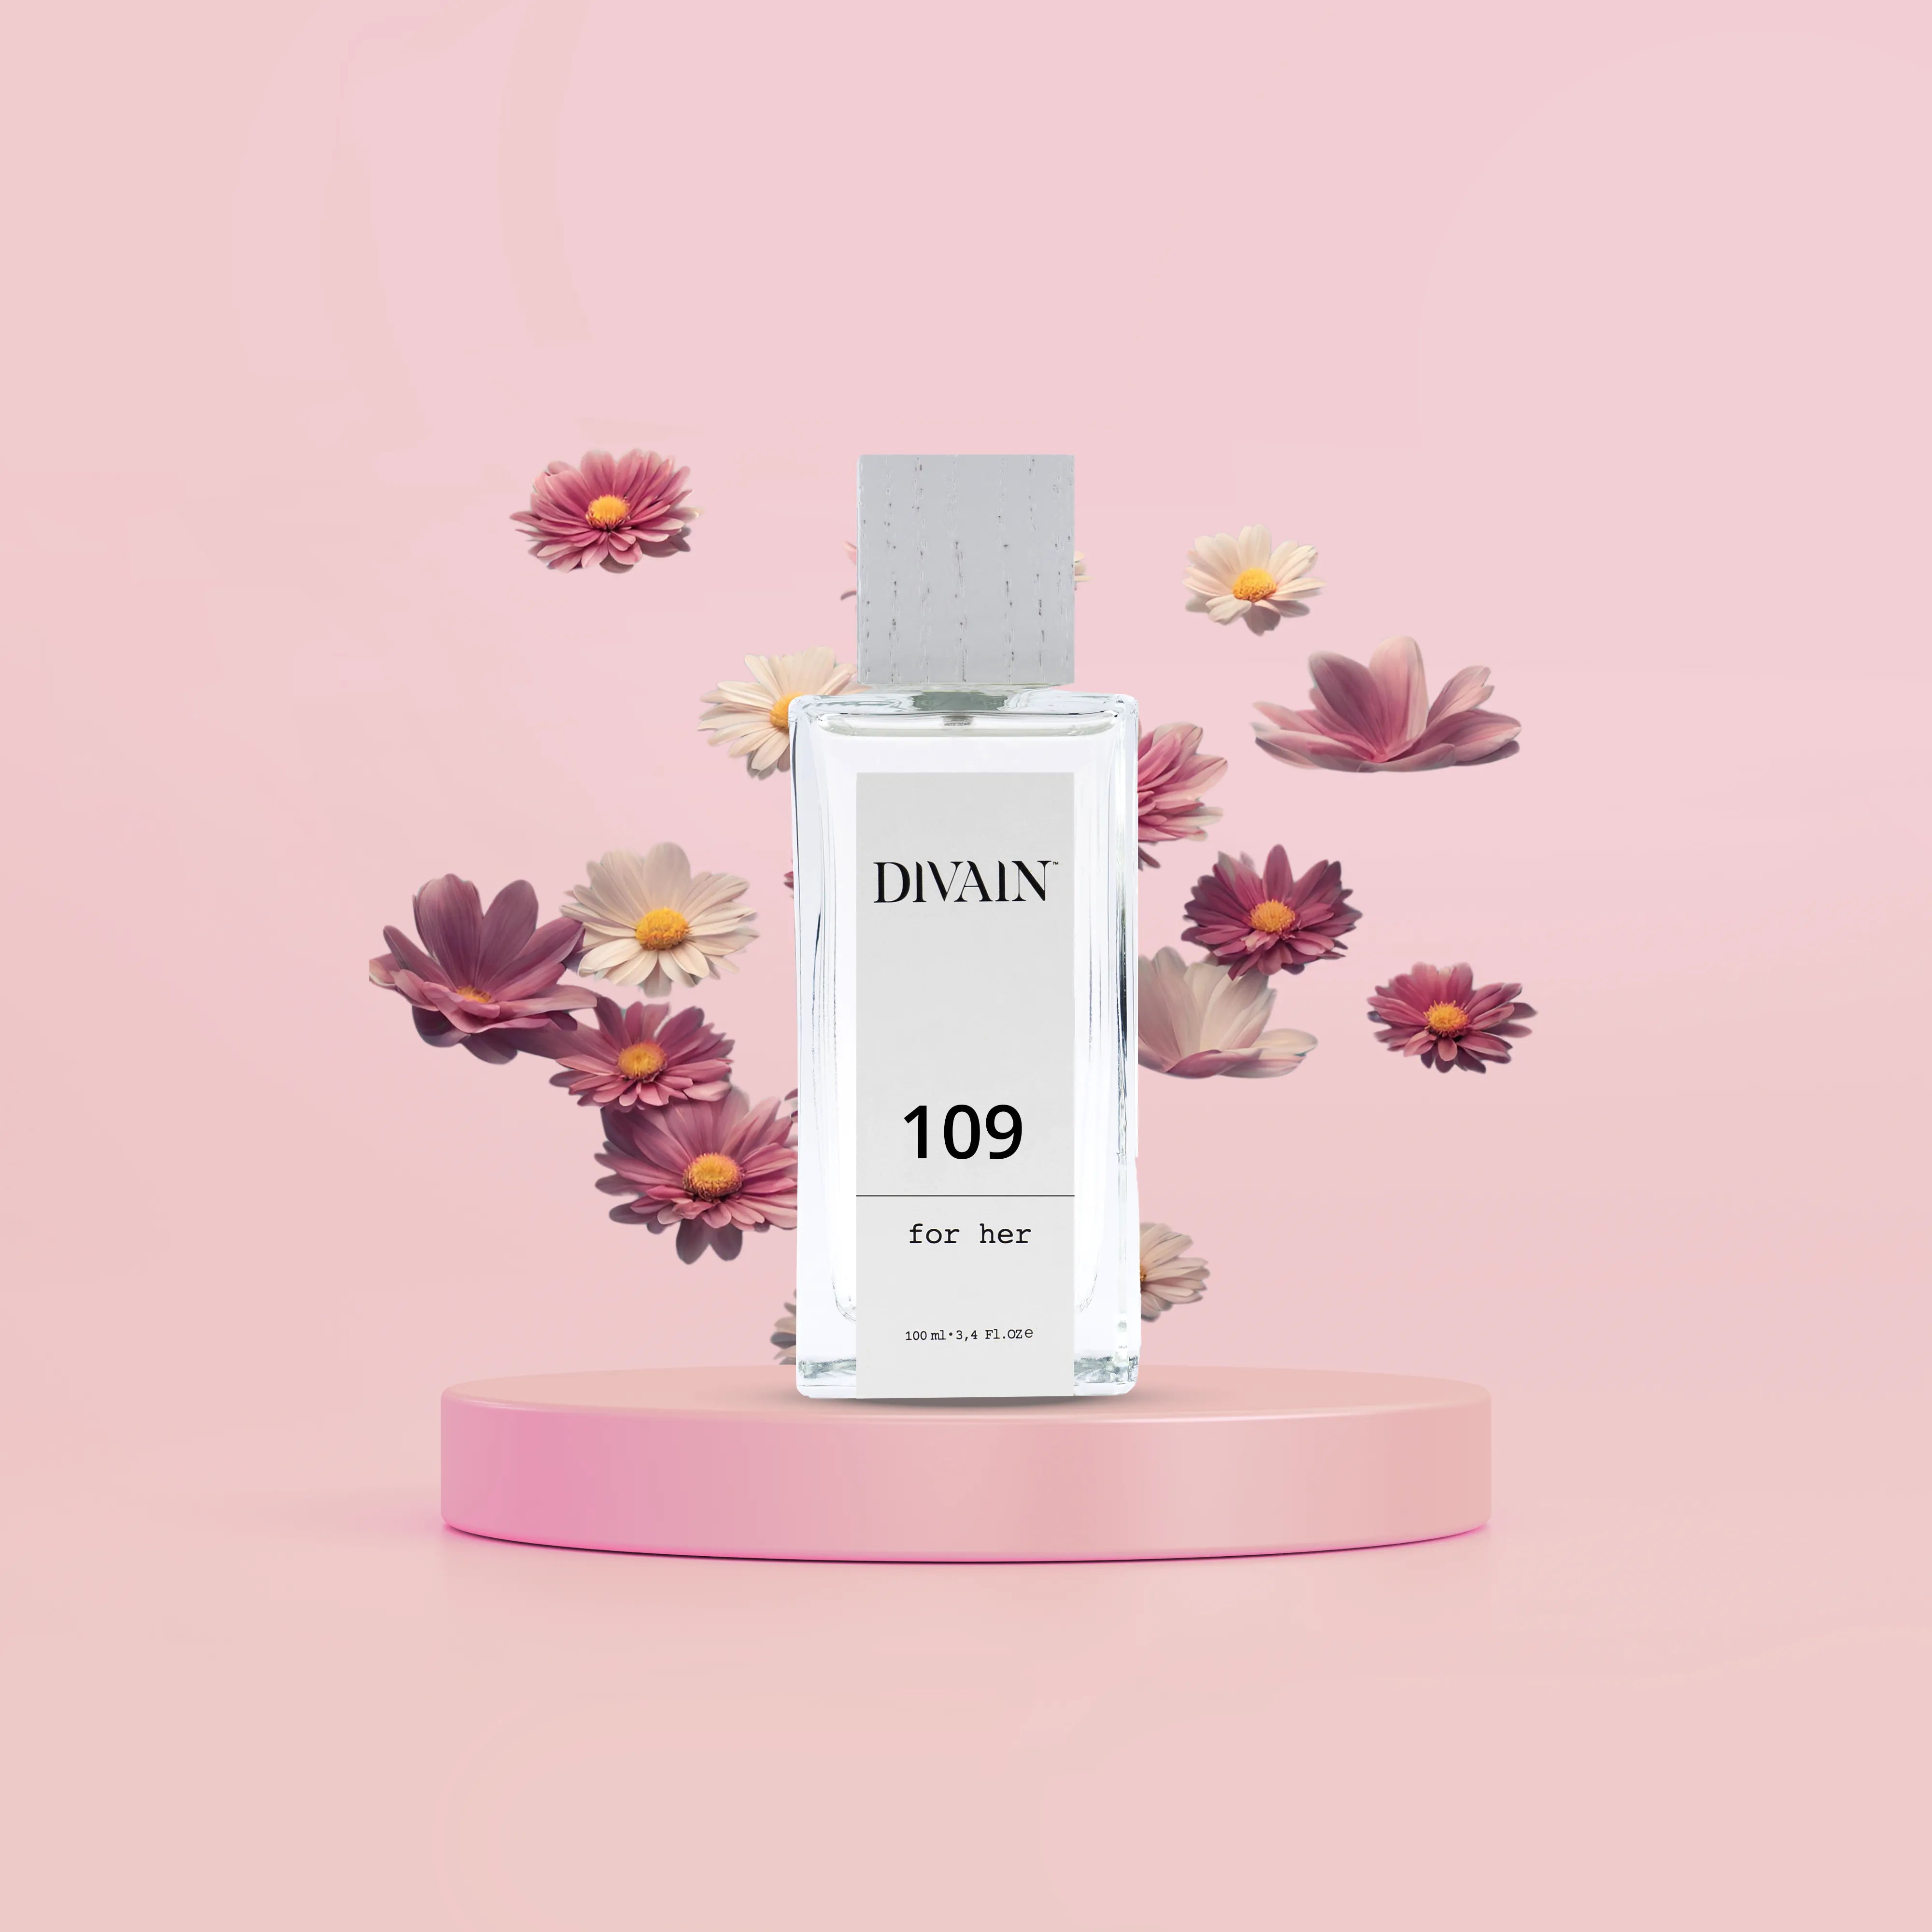 DIVAIN-109 | Similar a L'eau D'Issey de Issey Miyake | Mujer